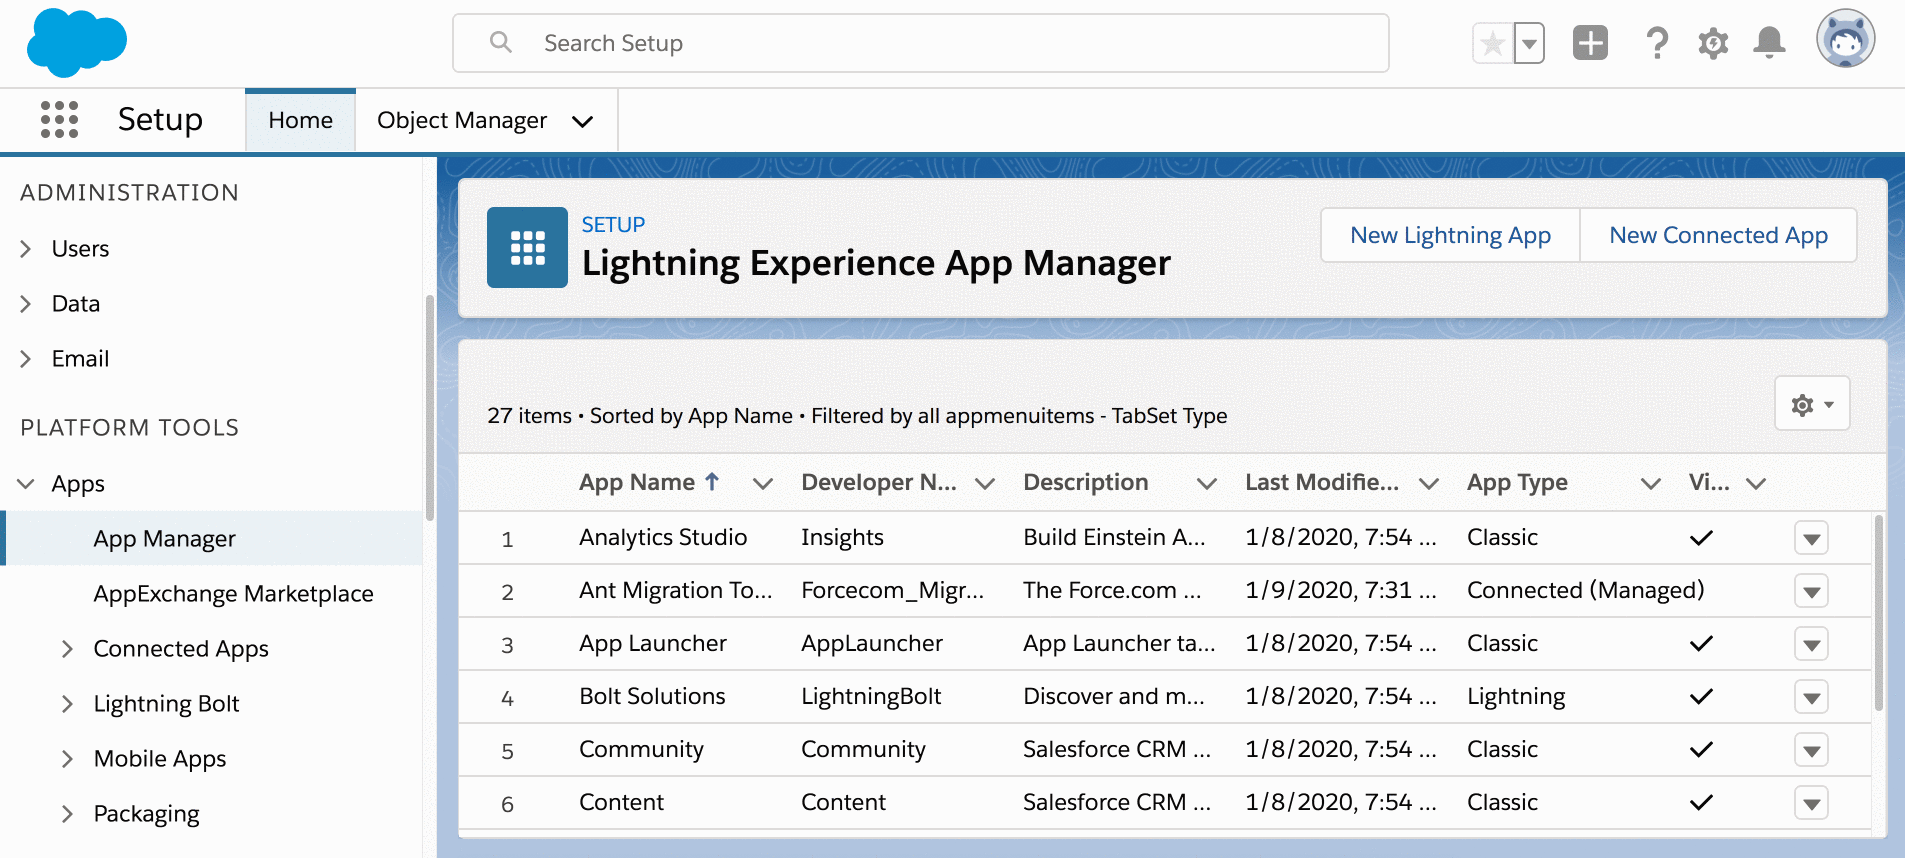 Create_a_new_Salesforce_connected_app_and_enter_basic_information___Tethr_customer_integrations_support_larger_fields.gif